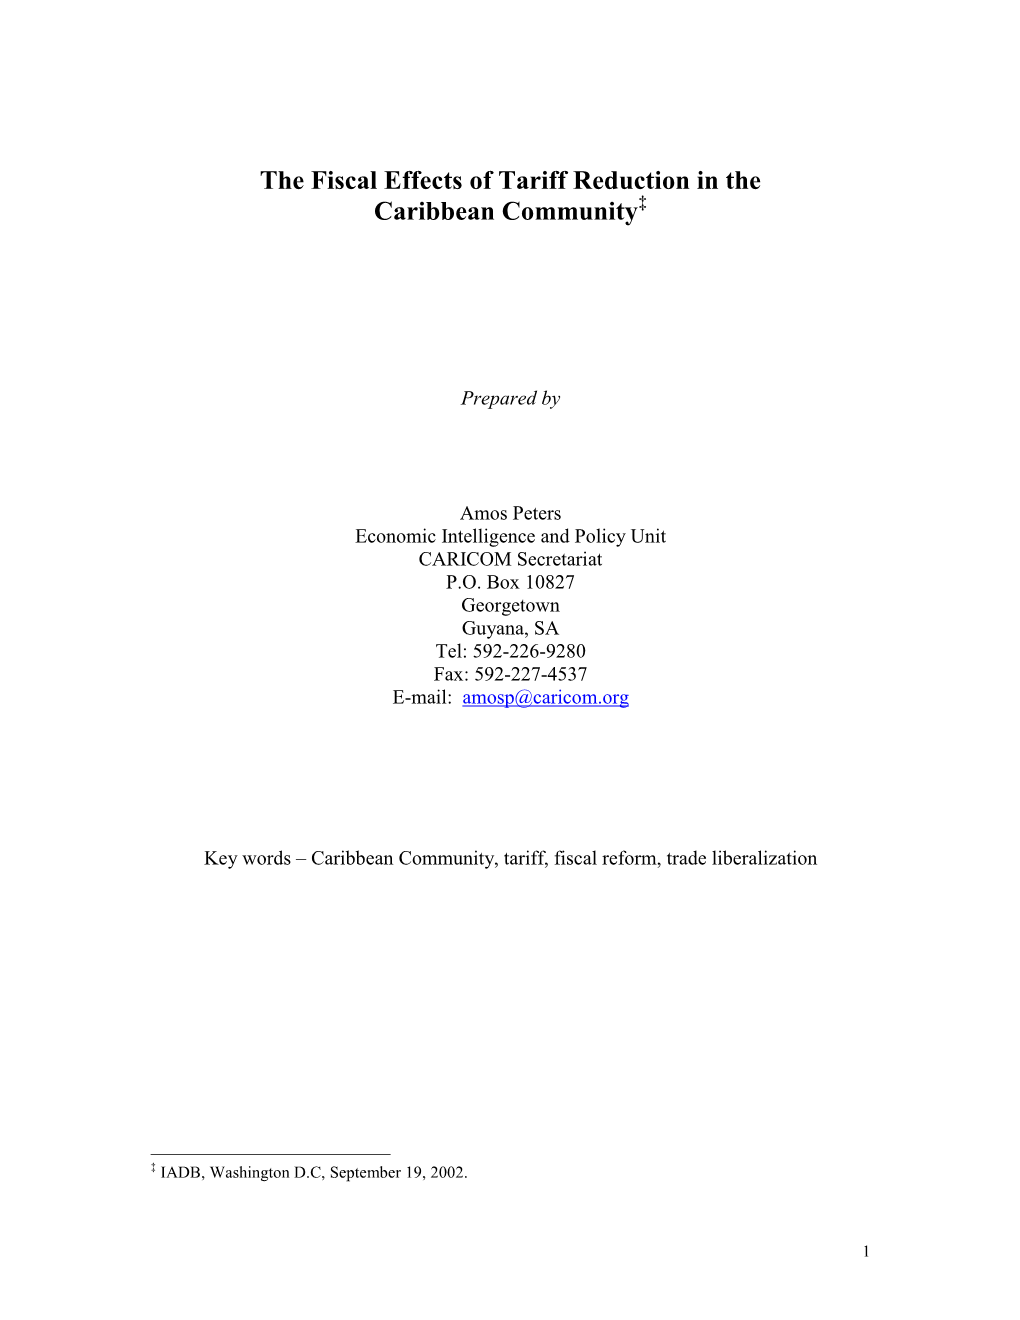 The Fiscal Effects of Tariff Reduction for the Caribbean Community